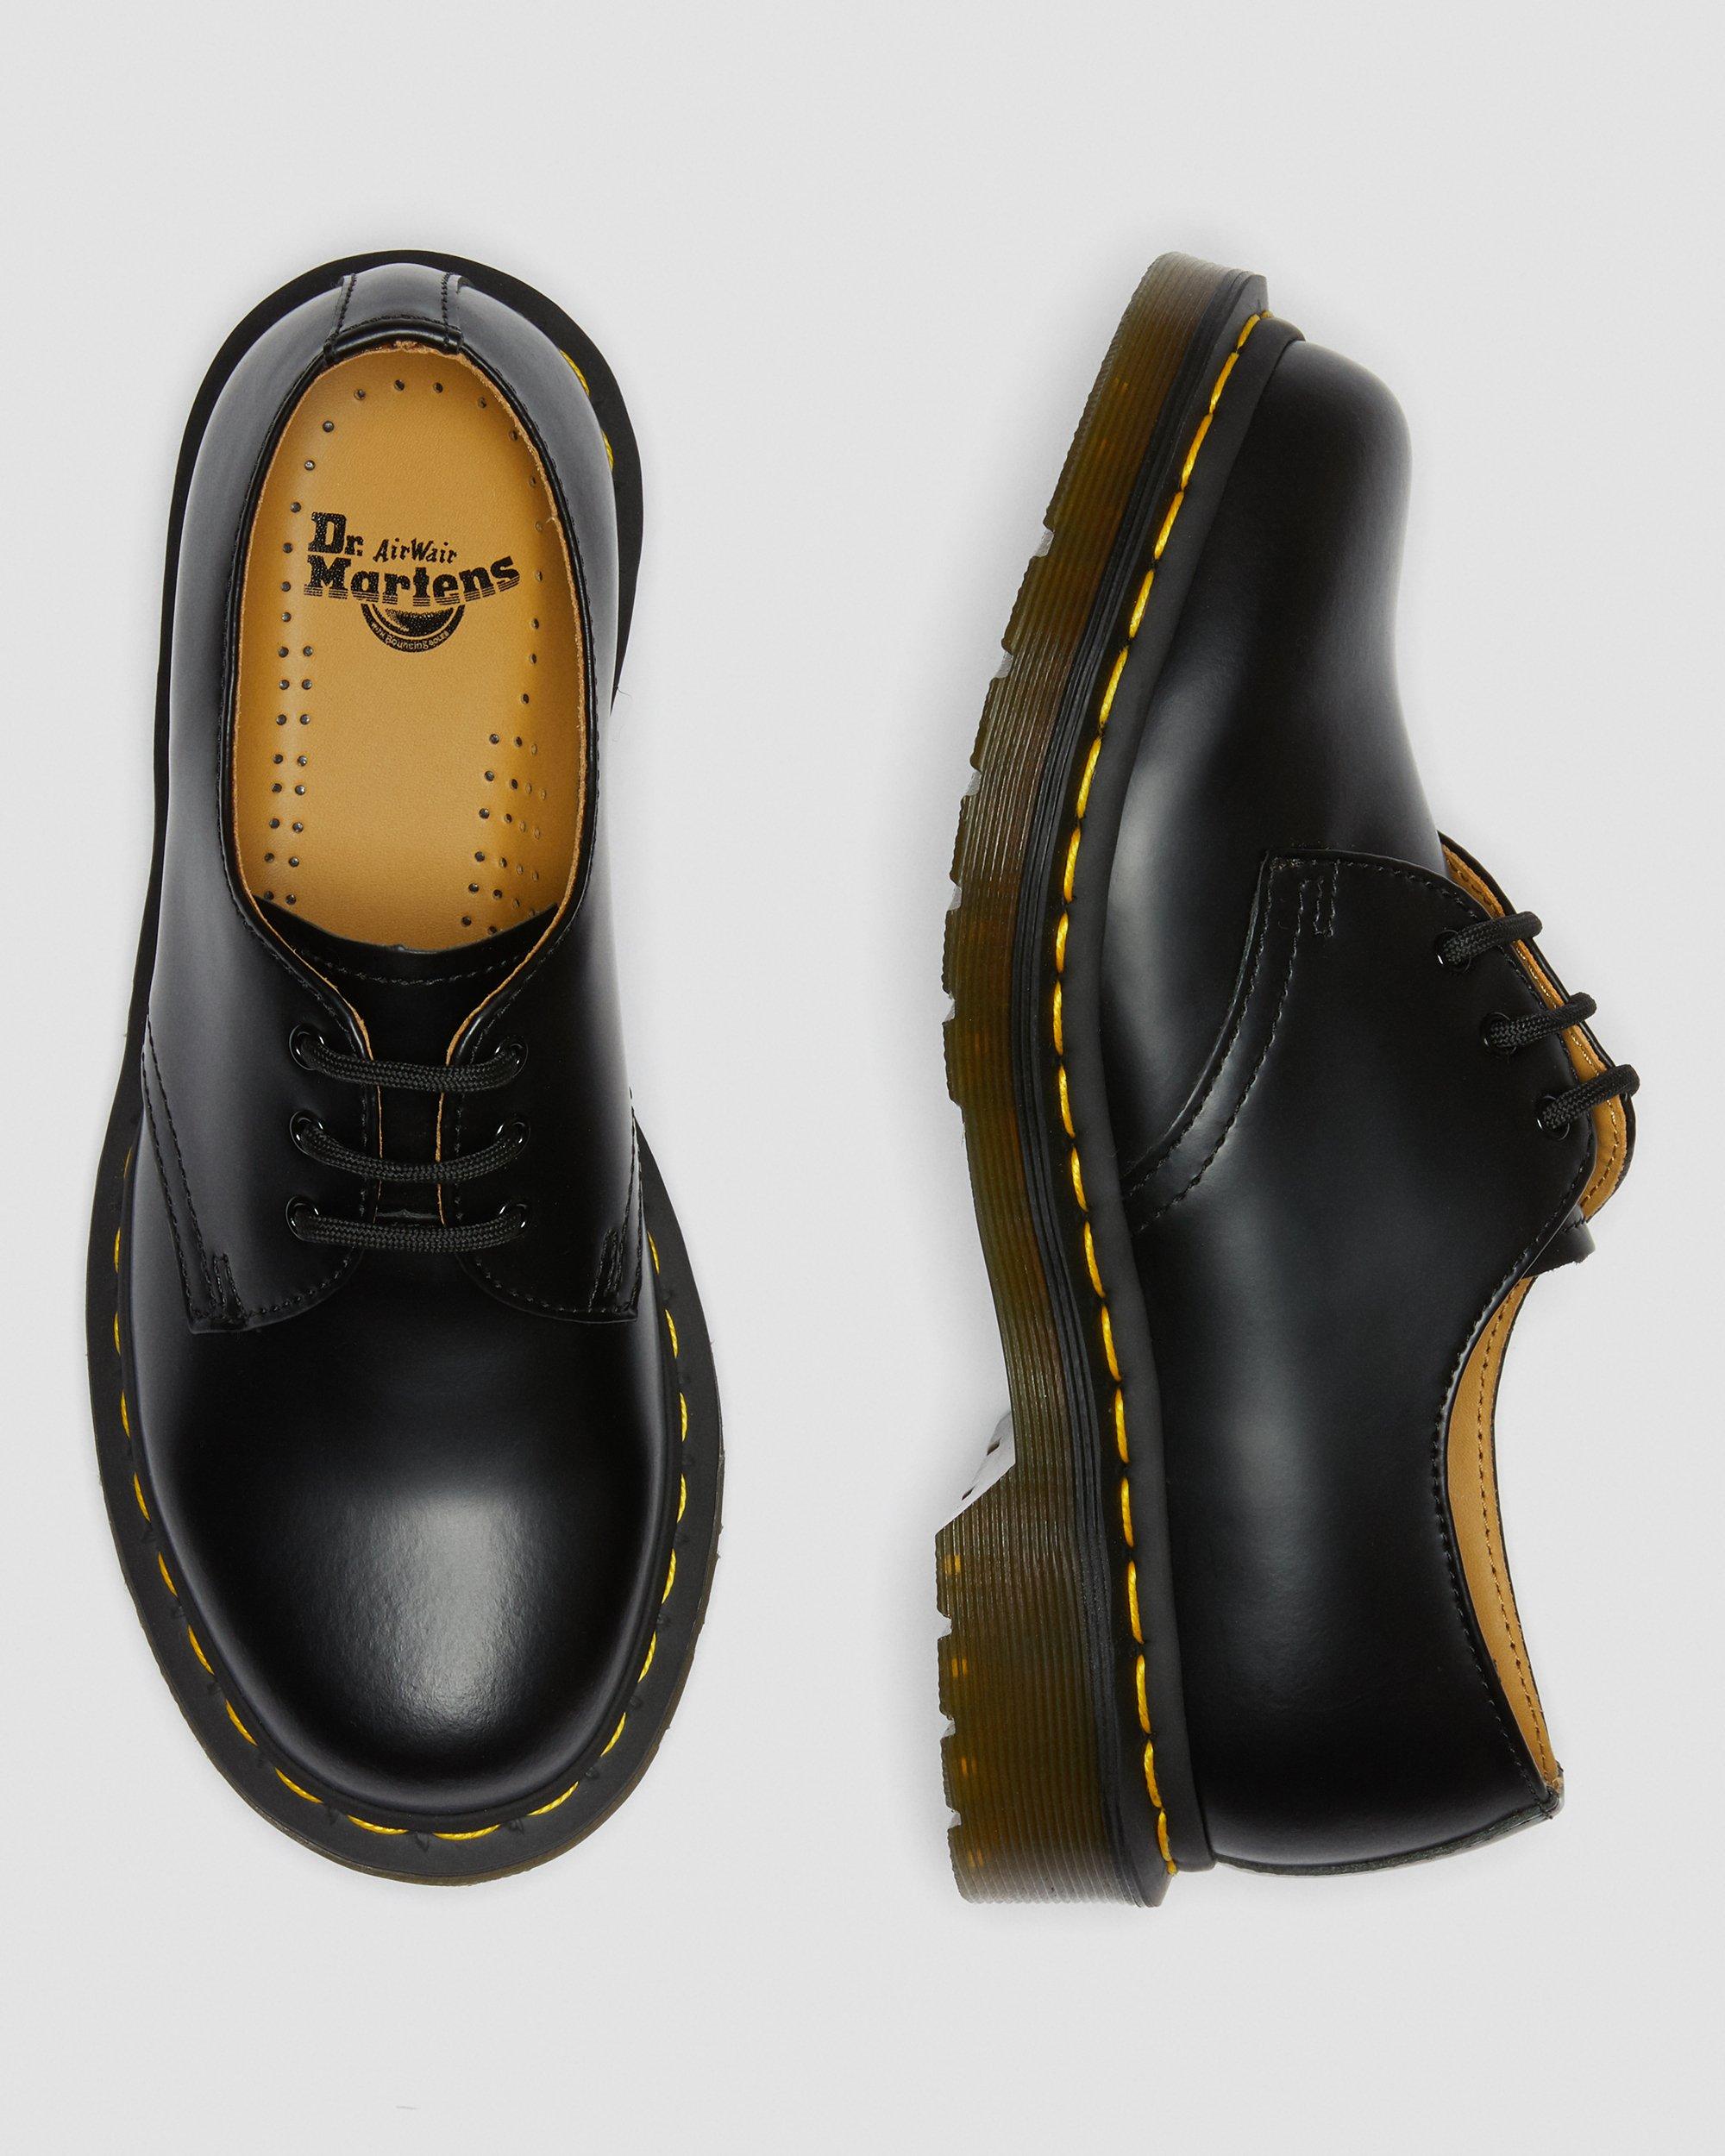 1461 Women's Smooth Leather Oxford Shoes, Black | Dr. Martens